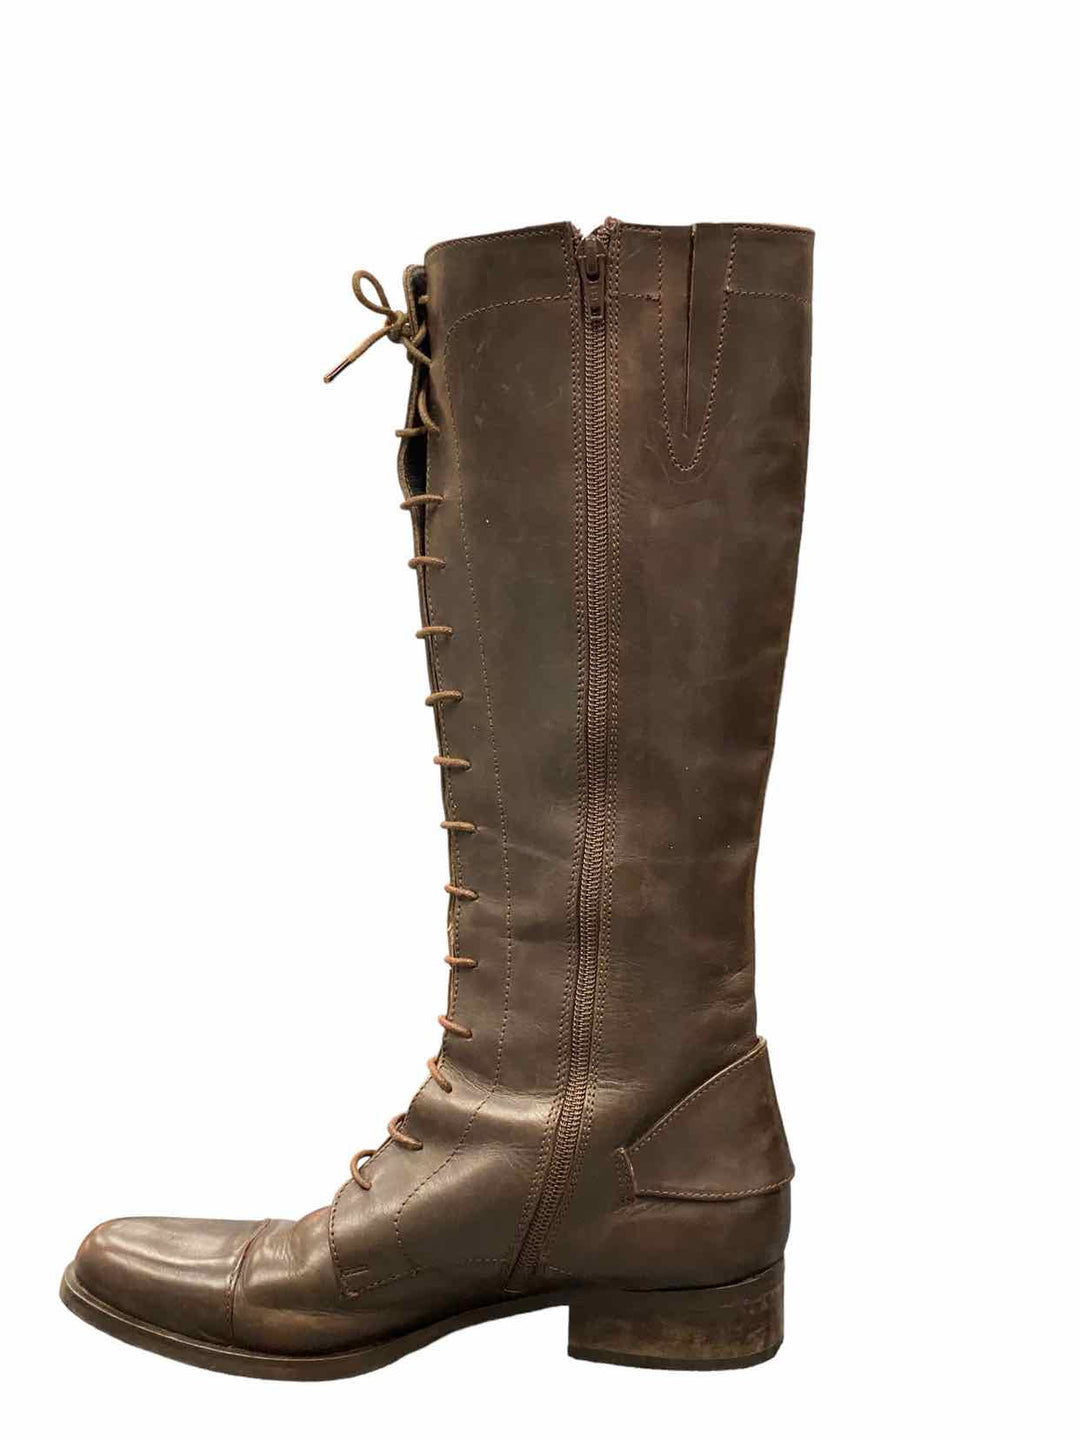 Espirit Shoe Size 7.5 Brown Leather Boots(knee)